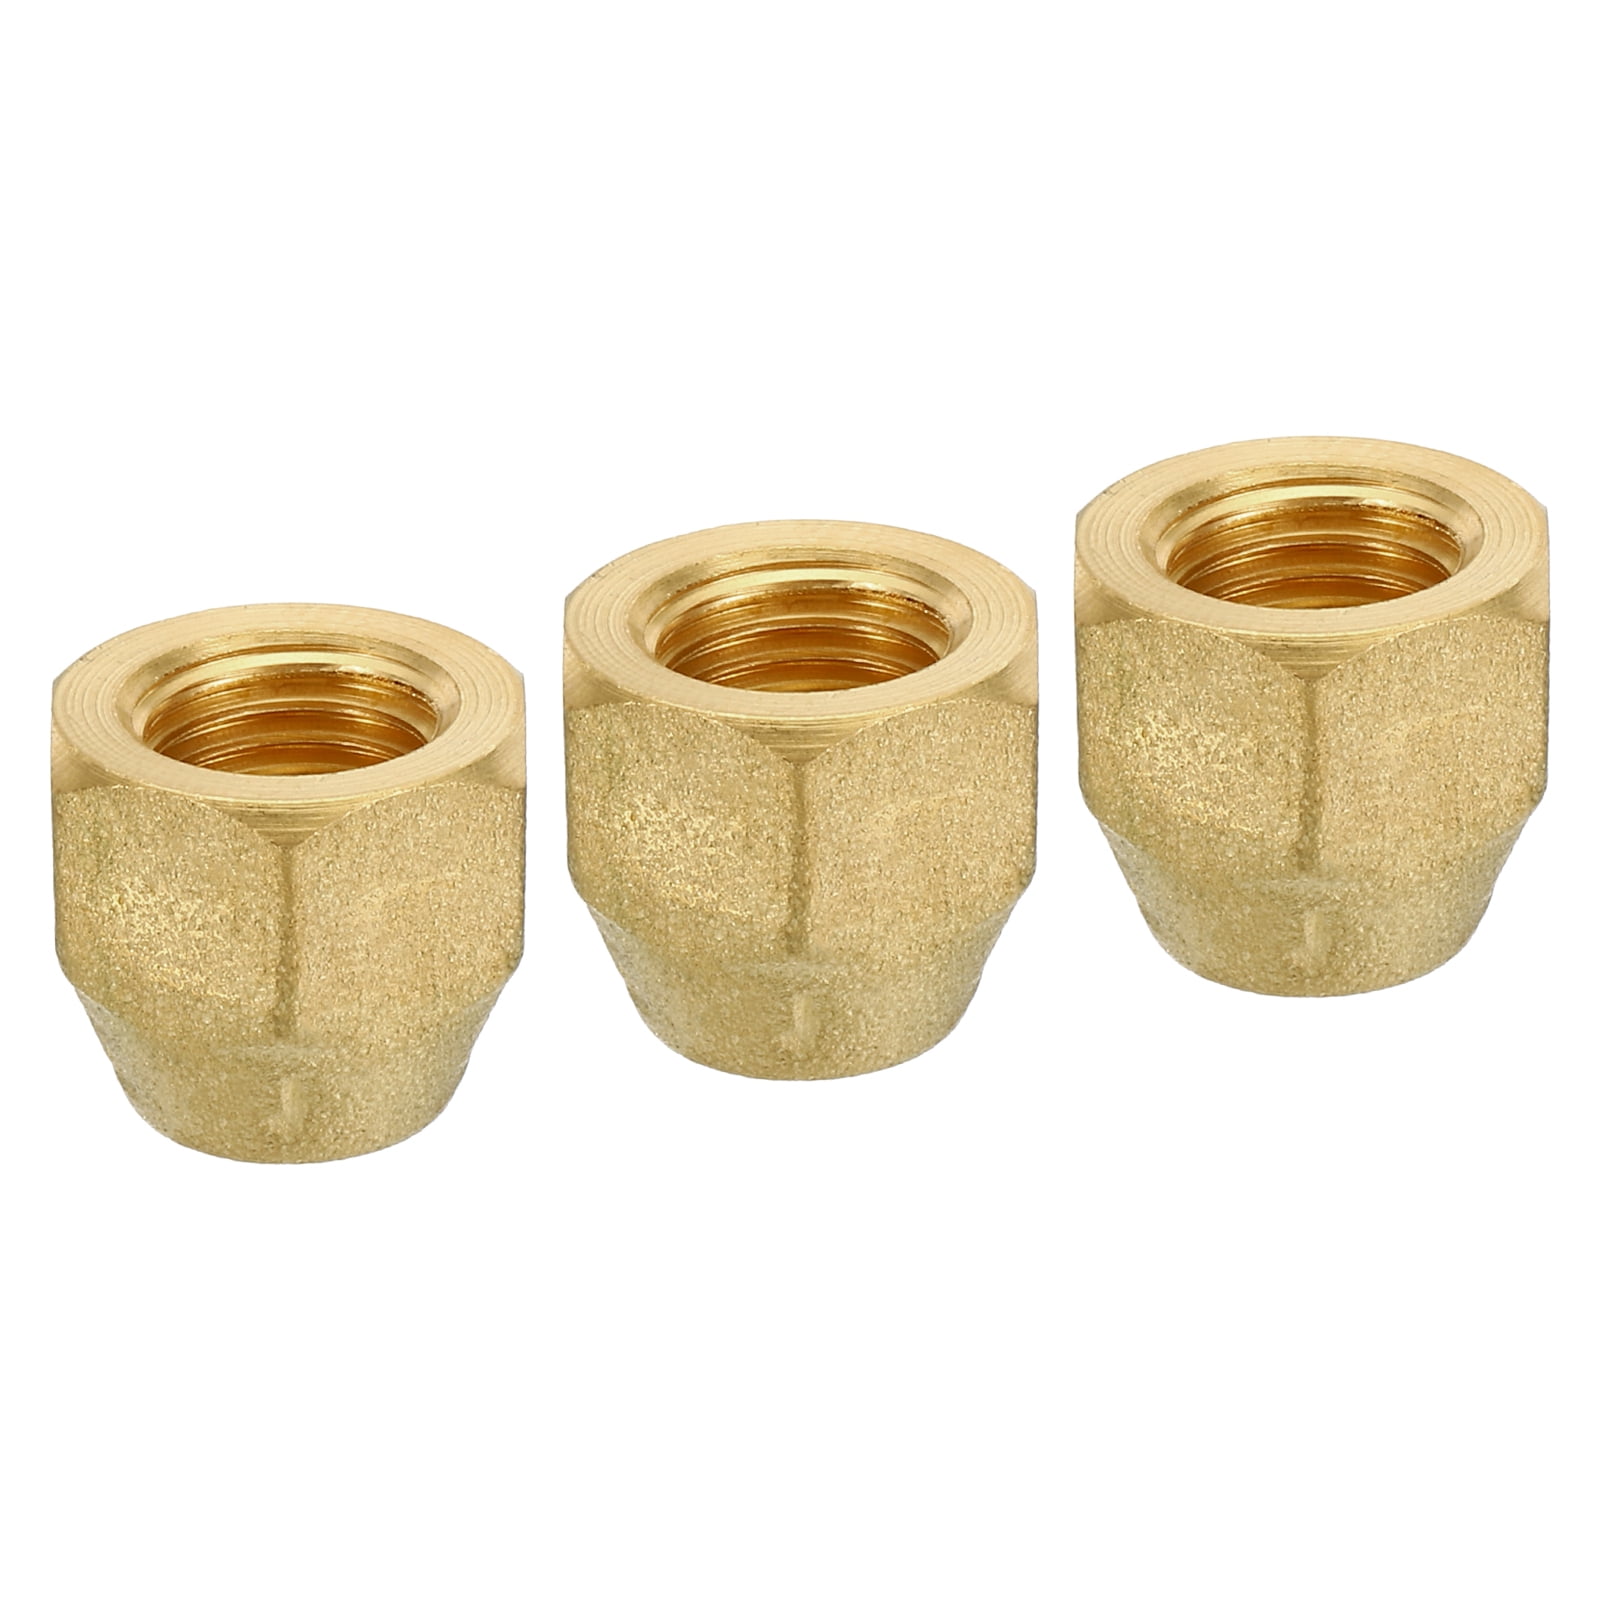 Uxcell Brass Flare Cap 1/4 Flare Female Flared Tube Fitting Nut